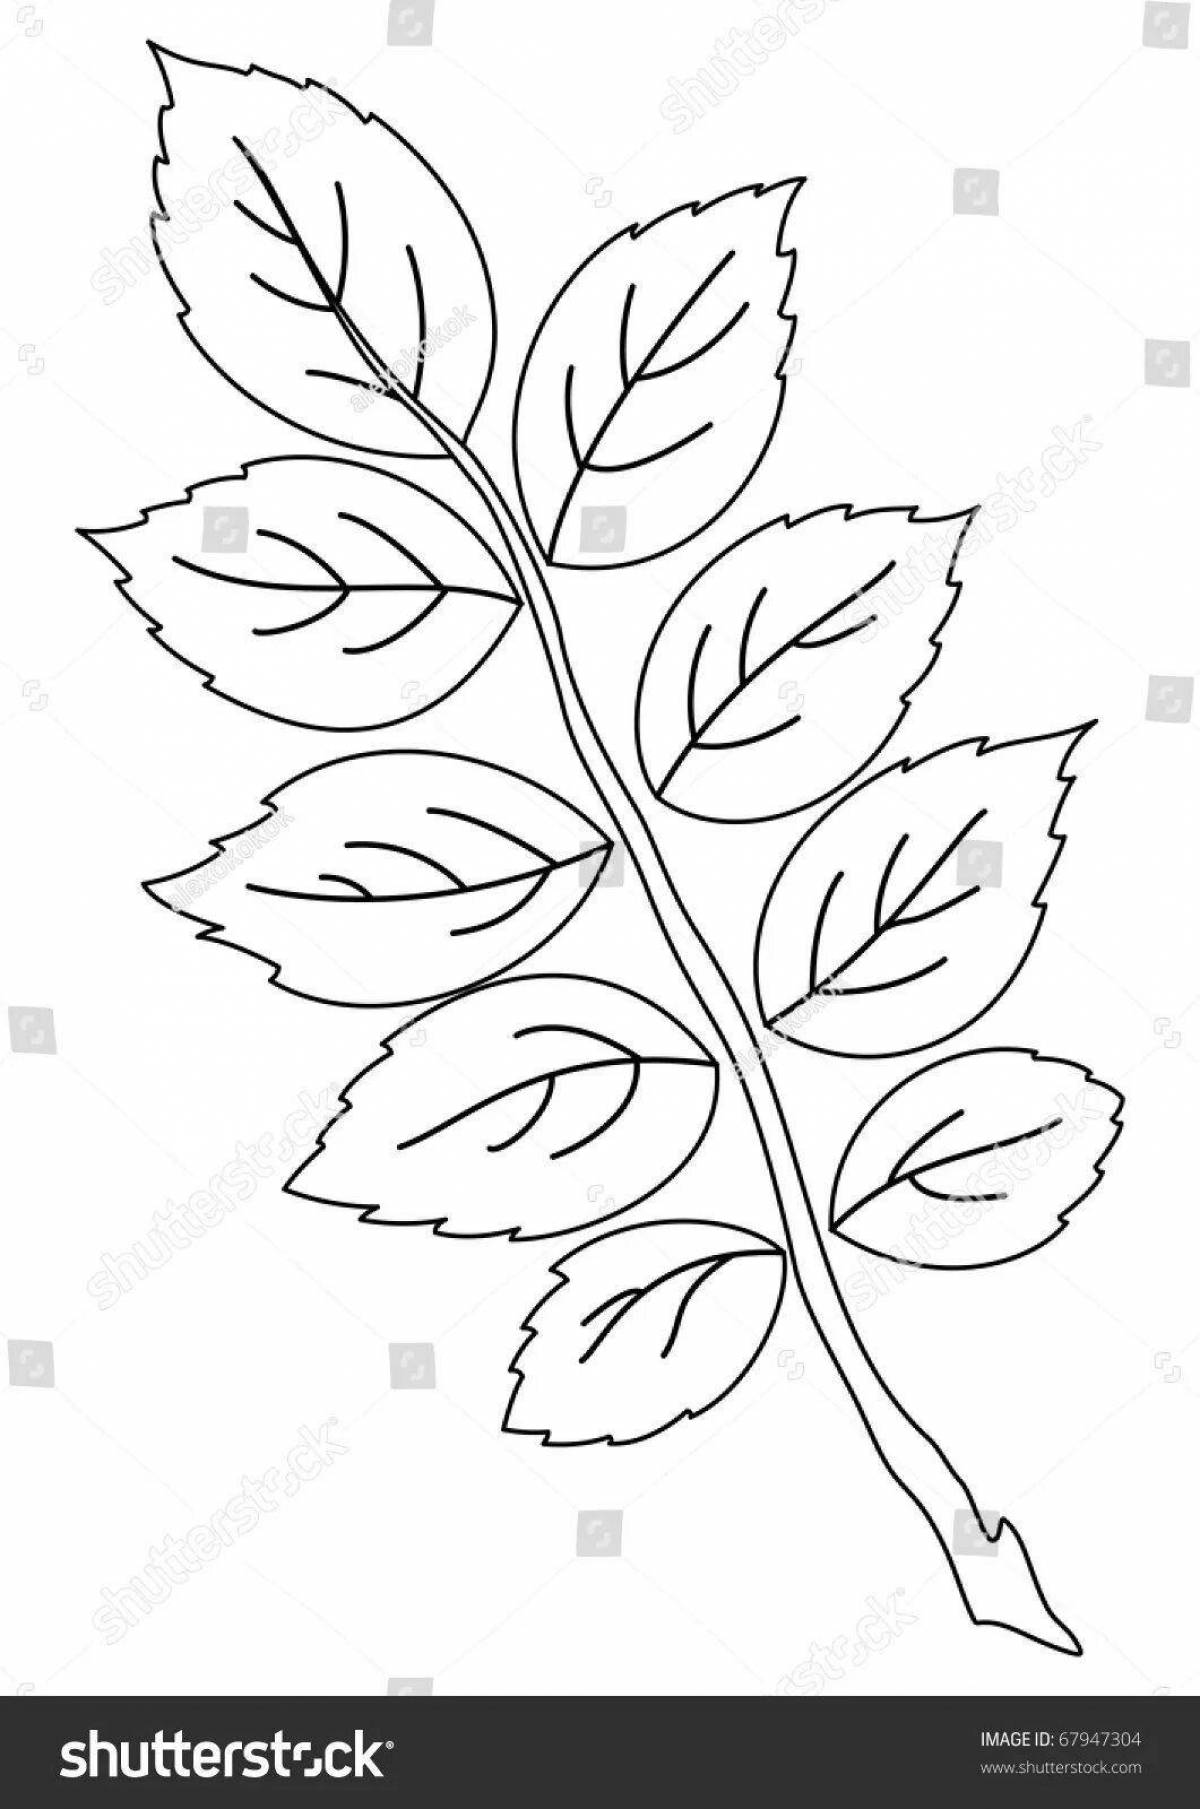 Multiple coloring pages of leaves on a branch